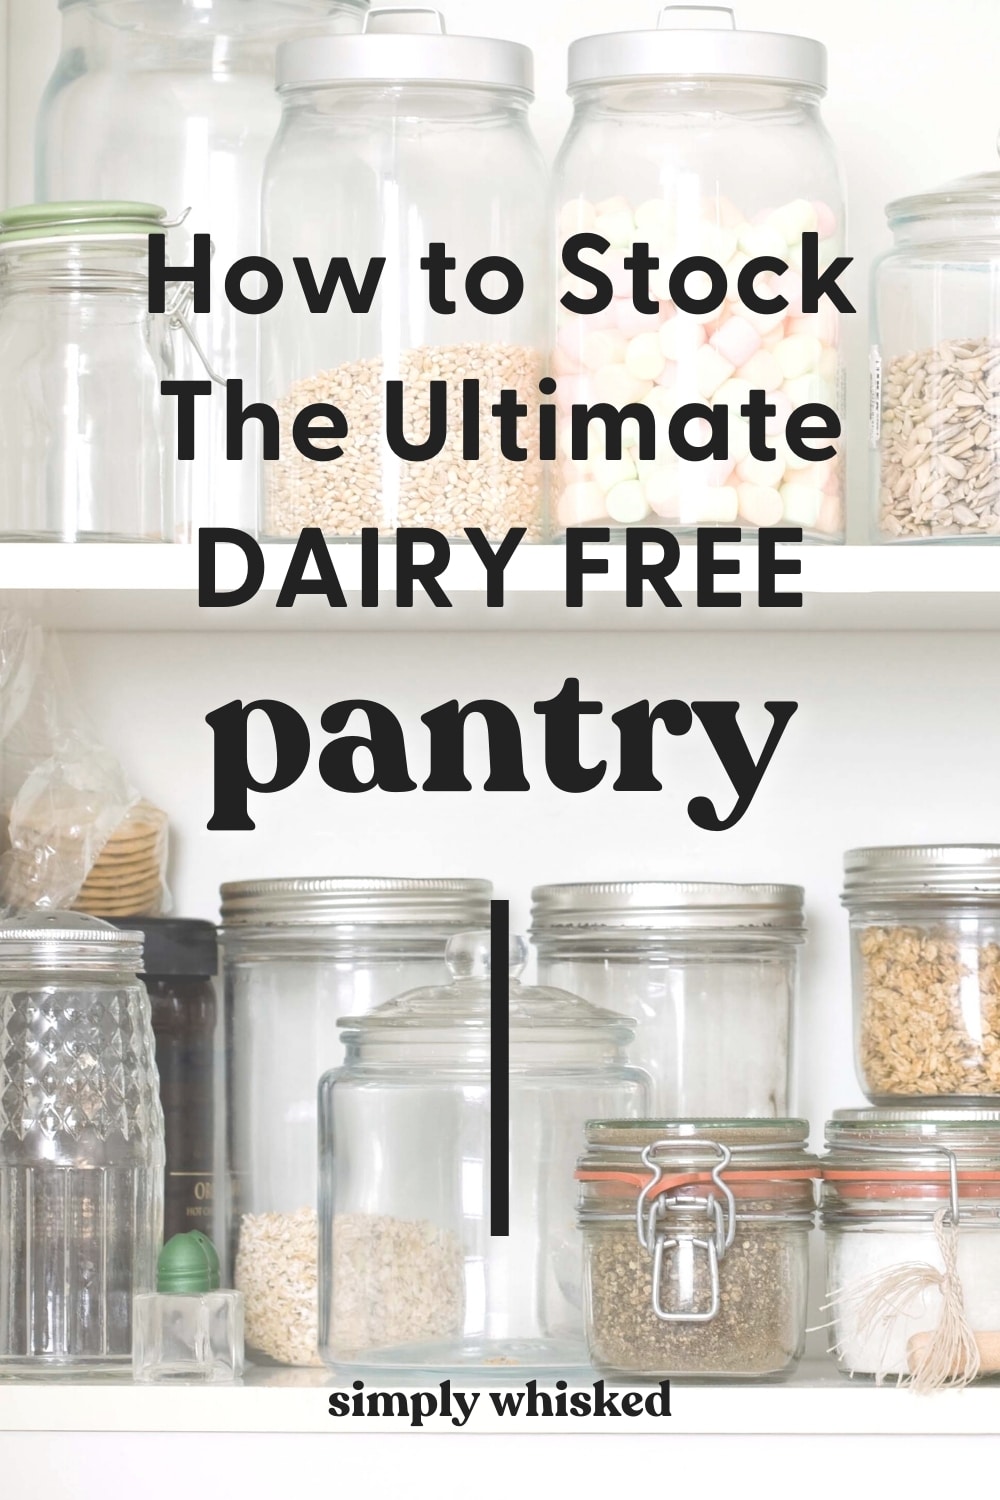 The Ultimate Dairy Free Pantry Guide